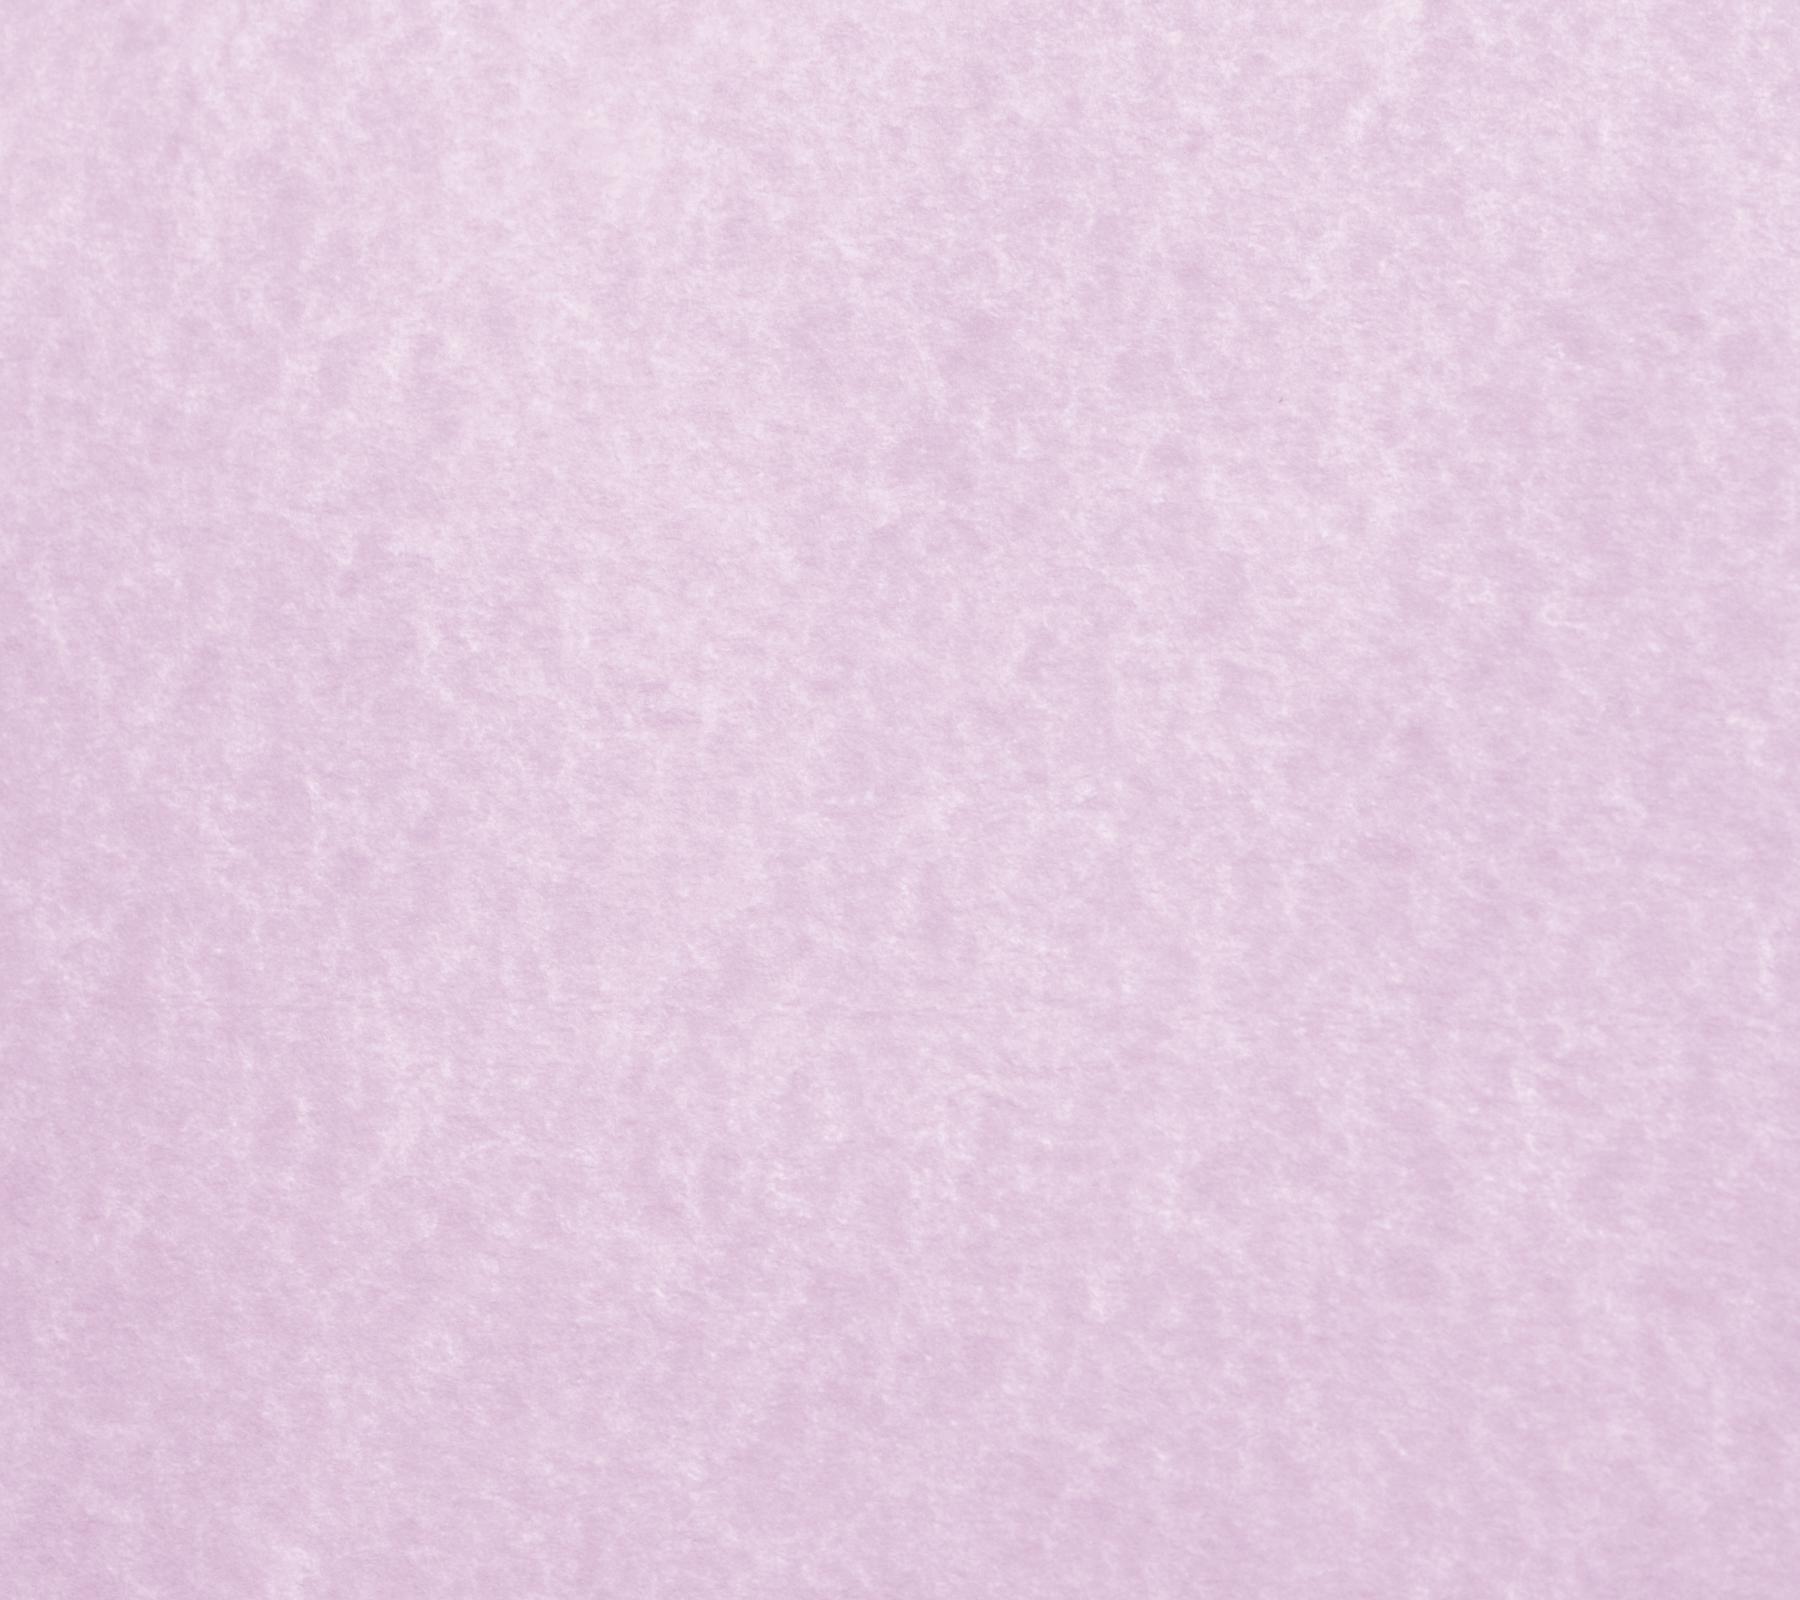 Parchment and Paper Backgrounds, Textures, Wallpapers and other